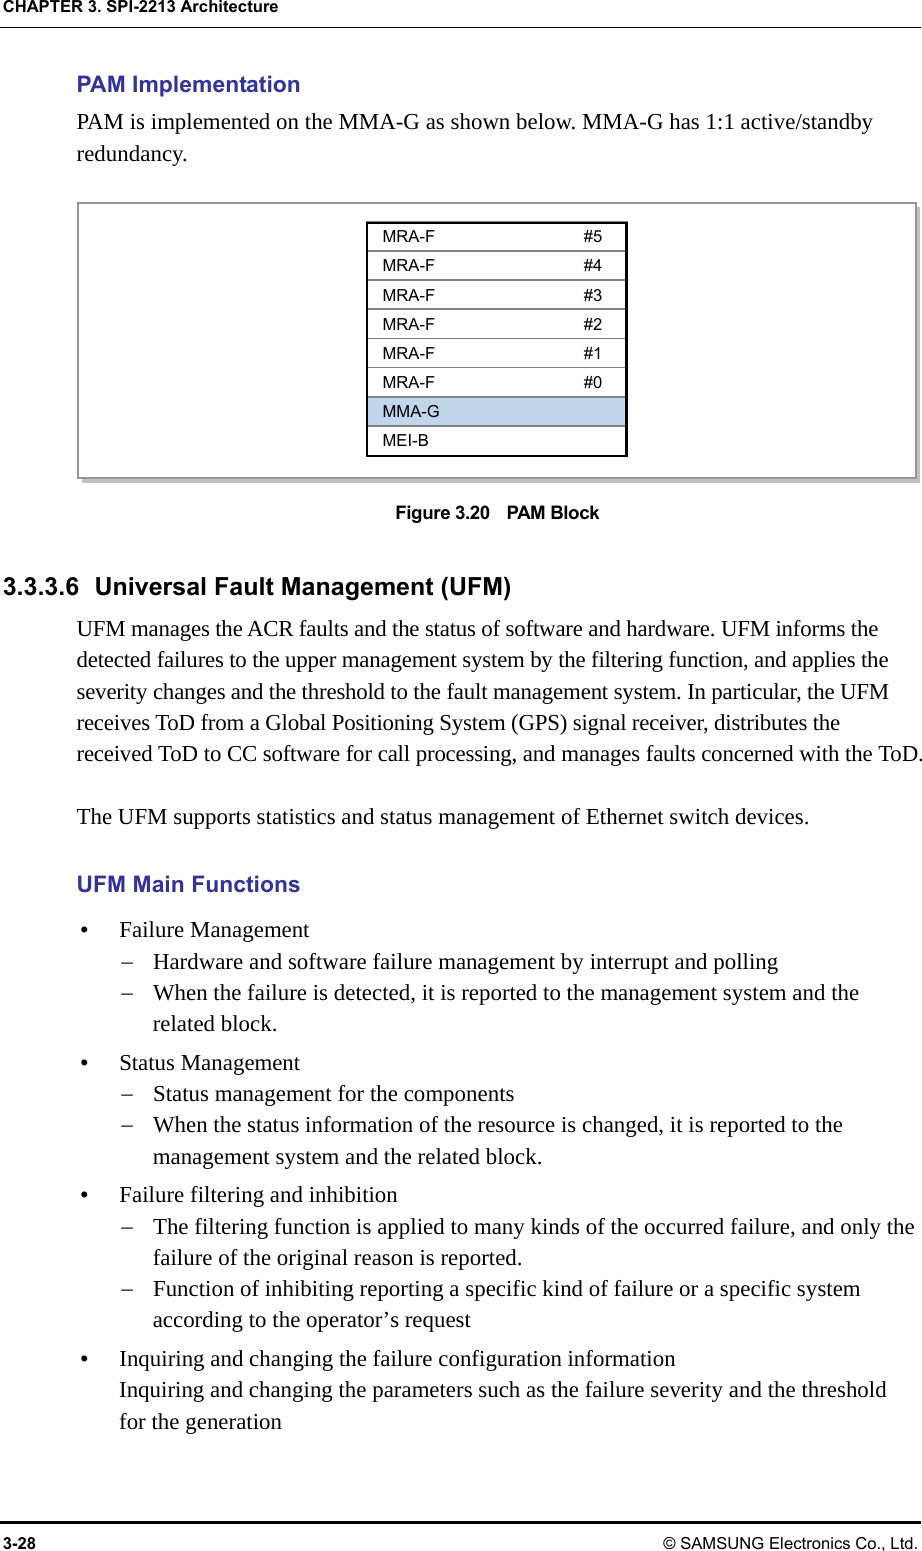 CHAPTER 3. SPI-2213 Architecture 3-28 © SAMSUNG Electronics Co., Ltd. PAM Implementation PAM is implemented on the MMA-G as shown below. MMA-G has 1:1 active/standby redundancy.  Figure 3.20    PAM Block  3.3.3.6  Universal Fault Management (UFM) UFM manages the ACR faults and the status of software and hardware. UFM informs the detected failures to the upper management system by the filtering function, and applies the severity changes and the threshold to the fault management system. In particular, the UFM receives ToD from a Global Positioning System (GPS) signal receiver, distributes the received ToD to CC software for call processing, and manages faults concerned with the ToD.  The UFM supports statistics and status management of Ethernet switch devices.  UFM Main Functions y Failure Management − Hardware and software failure management by interrupt and polling − When the failure is detected, it is reported to the management system and the related block. y Status Management − Status management for the components − When the status information of the resource is changed, it is reported to the management system and the related block. y Failure filtering and inhibition − The filtering function is applied to many kinds of the occurred failure, and only the failure of the original reason is reported. − Function of inhibiting reporting a specific kind of failure or a specific system according to the operator’s request y Inquiring and changing the failure configuration information Inquiring and changing the parameters such as the failure severity and the threshold for the generation MRA-F #5 MRA-F #4 MRA-F #3 MRA-F #2 MRA-F #1 MRA-F #0 MMA-G MEI-B